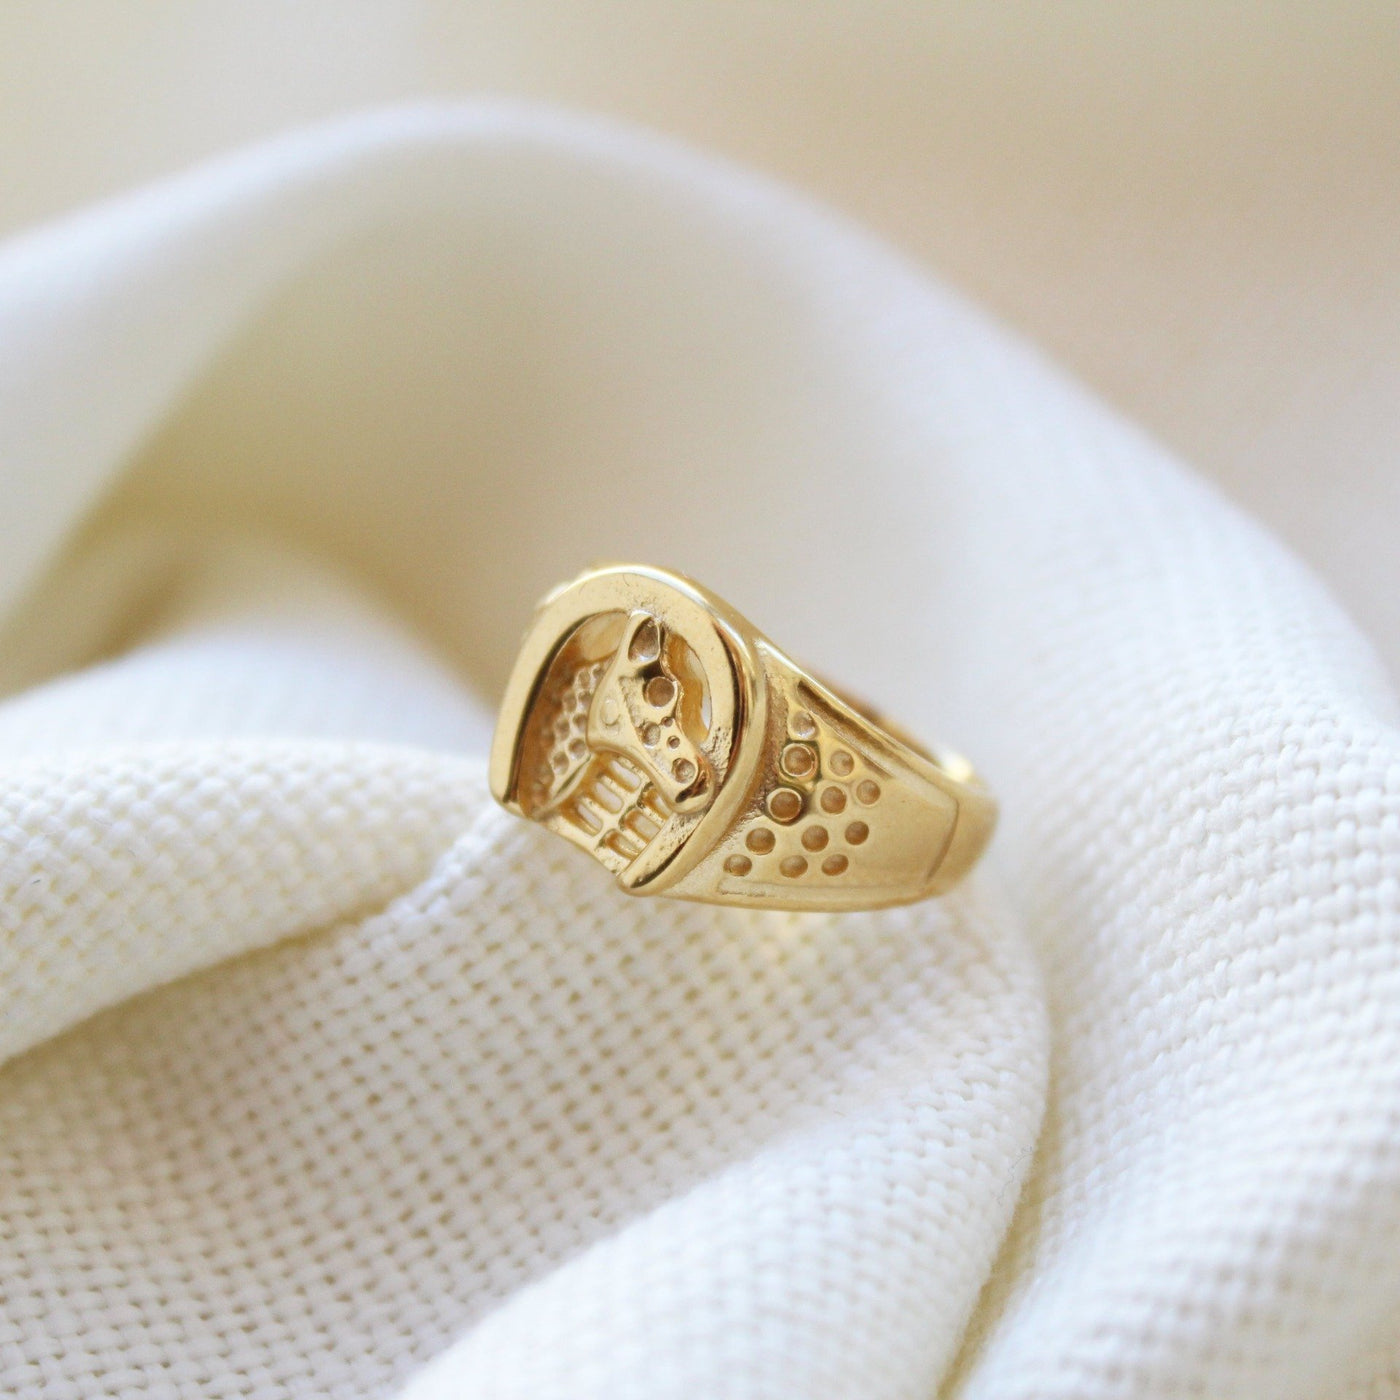 Gold-Plated Horse Ring - Maral Kunst Jewelry